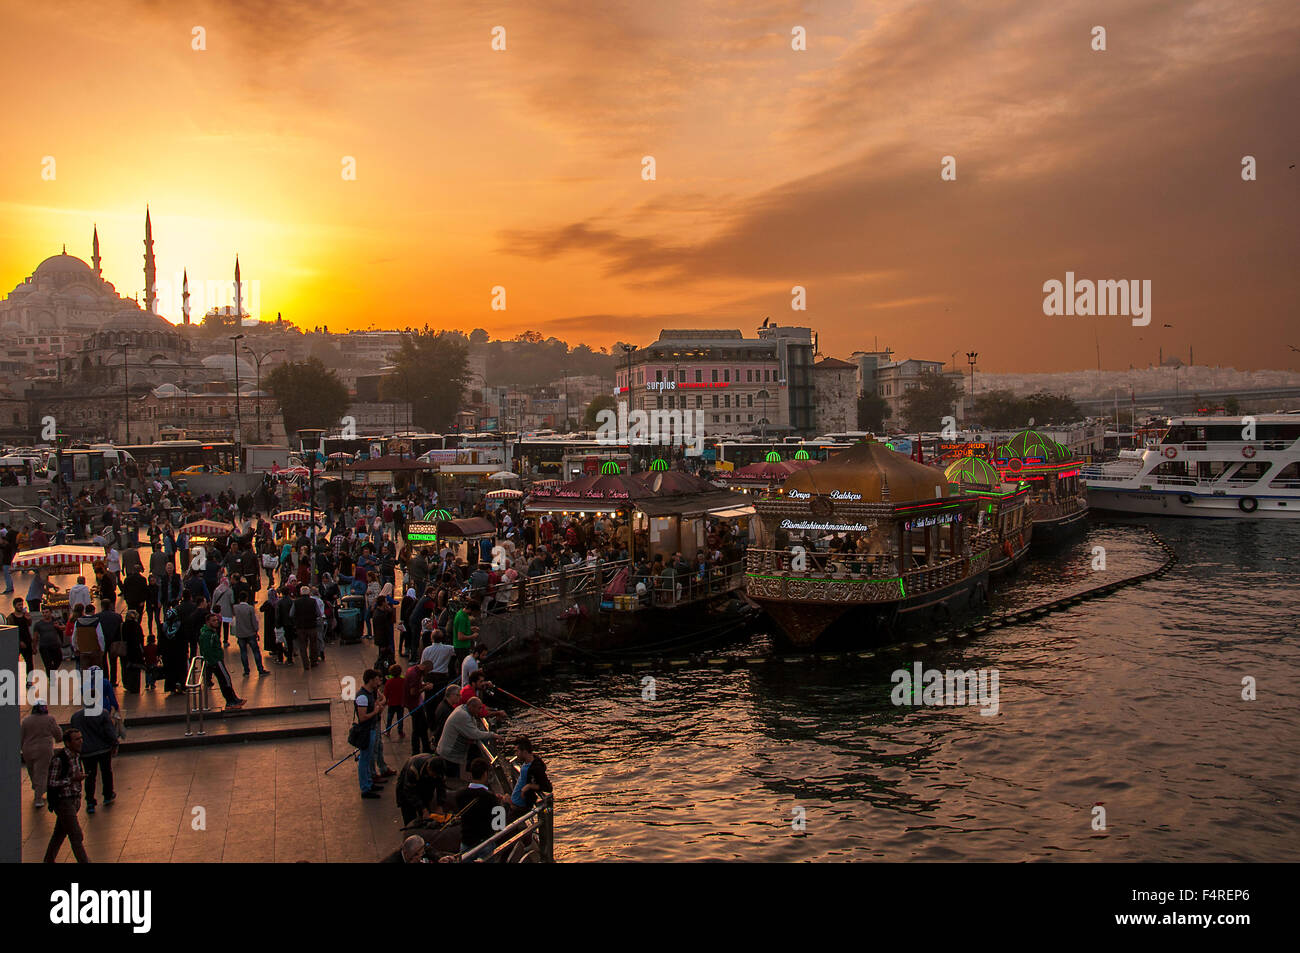 Istanbul, Turkey - October 20, 2015: Istanbul skyline with Suleymaniye mosque and city life view from Bosphorus strait in Istanb Stock Photo